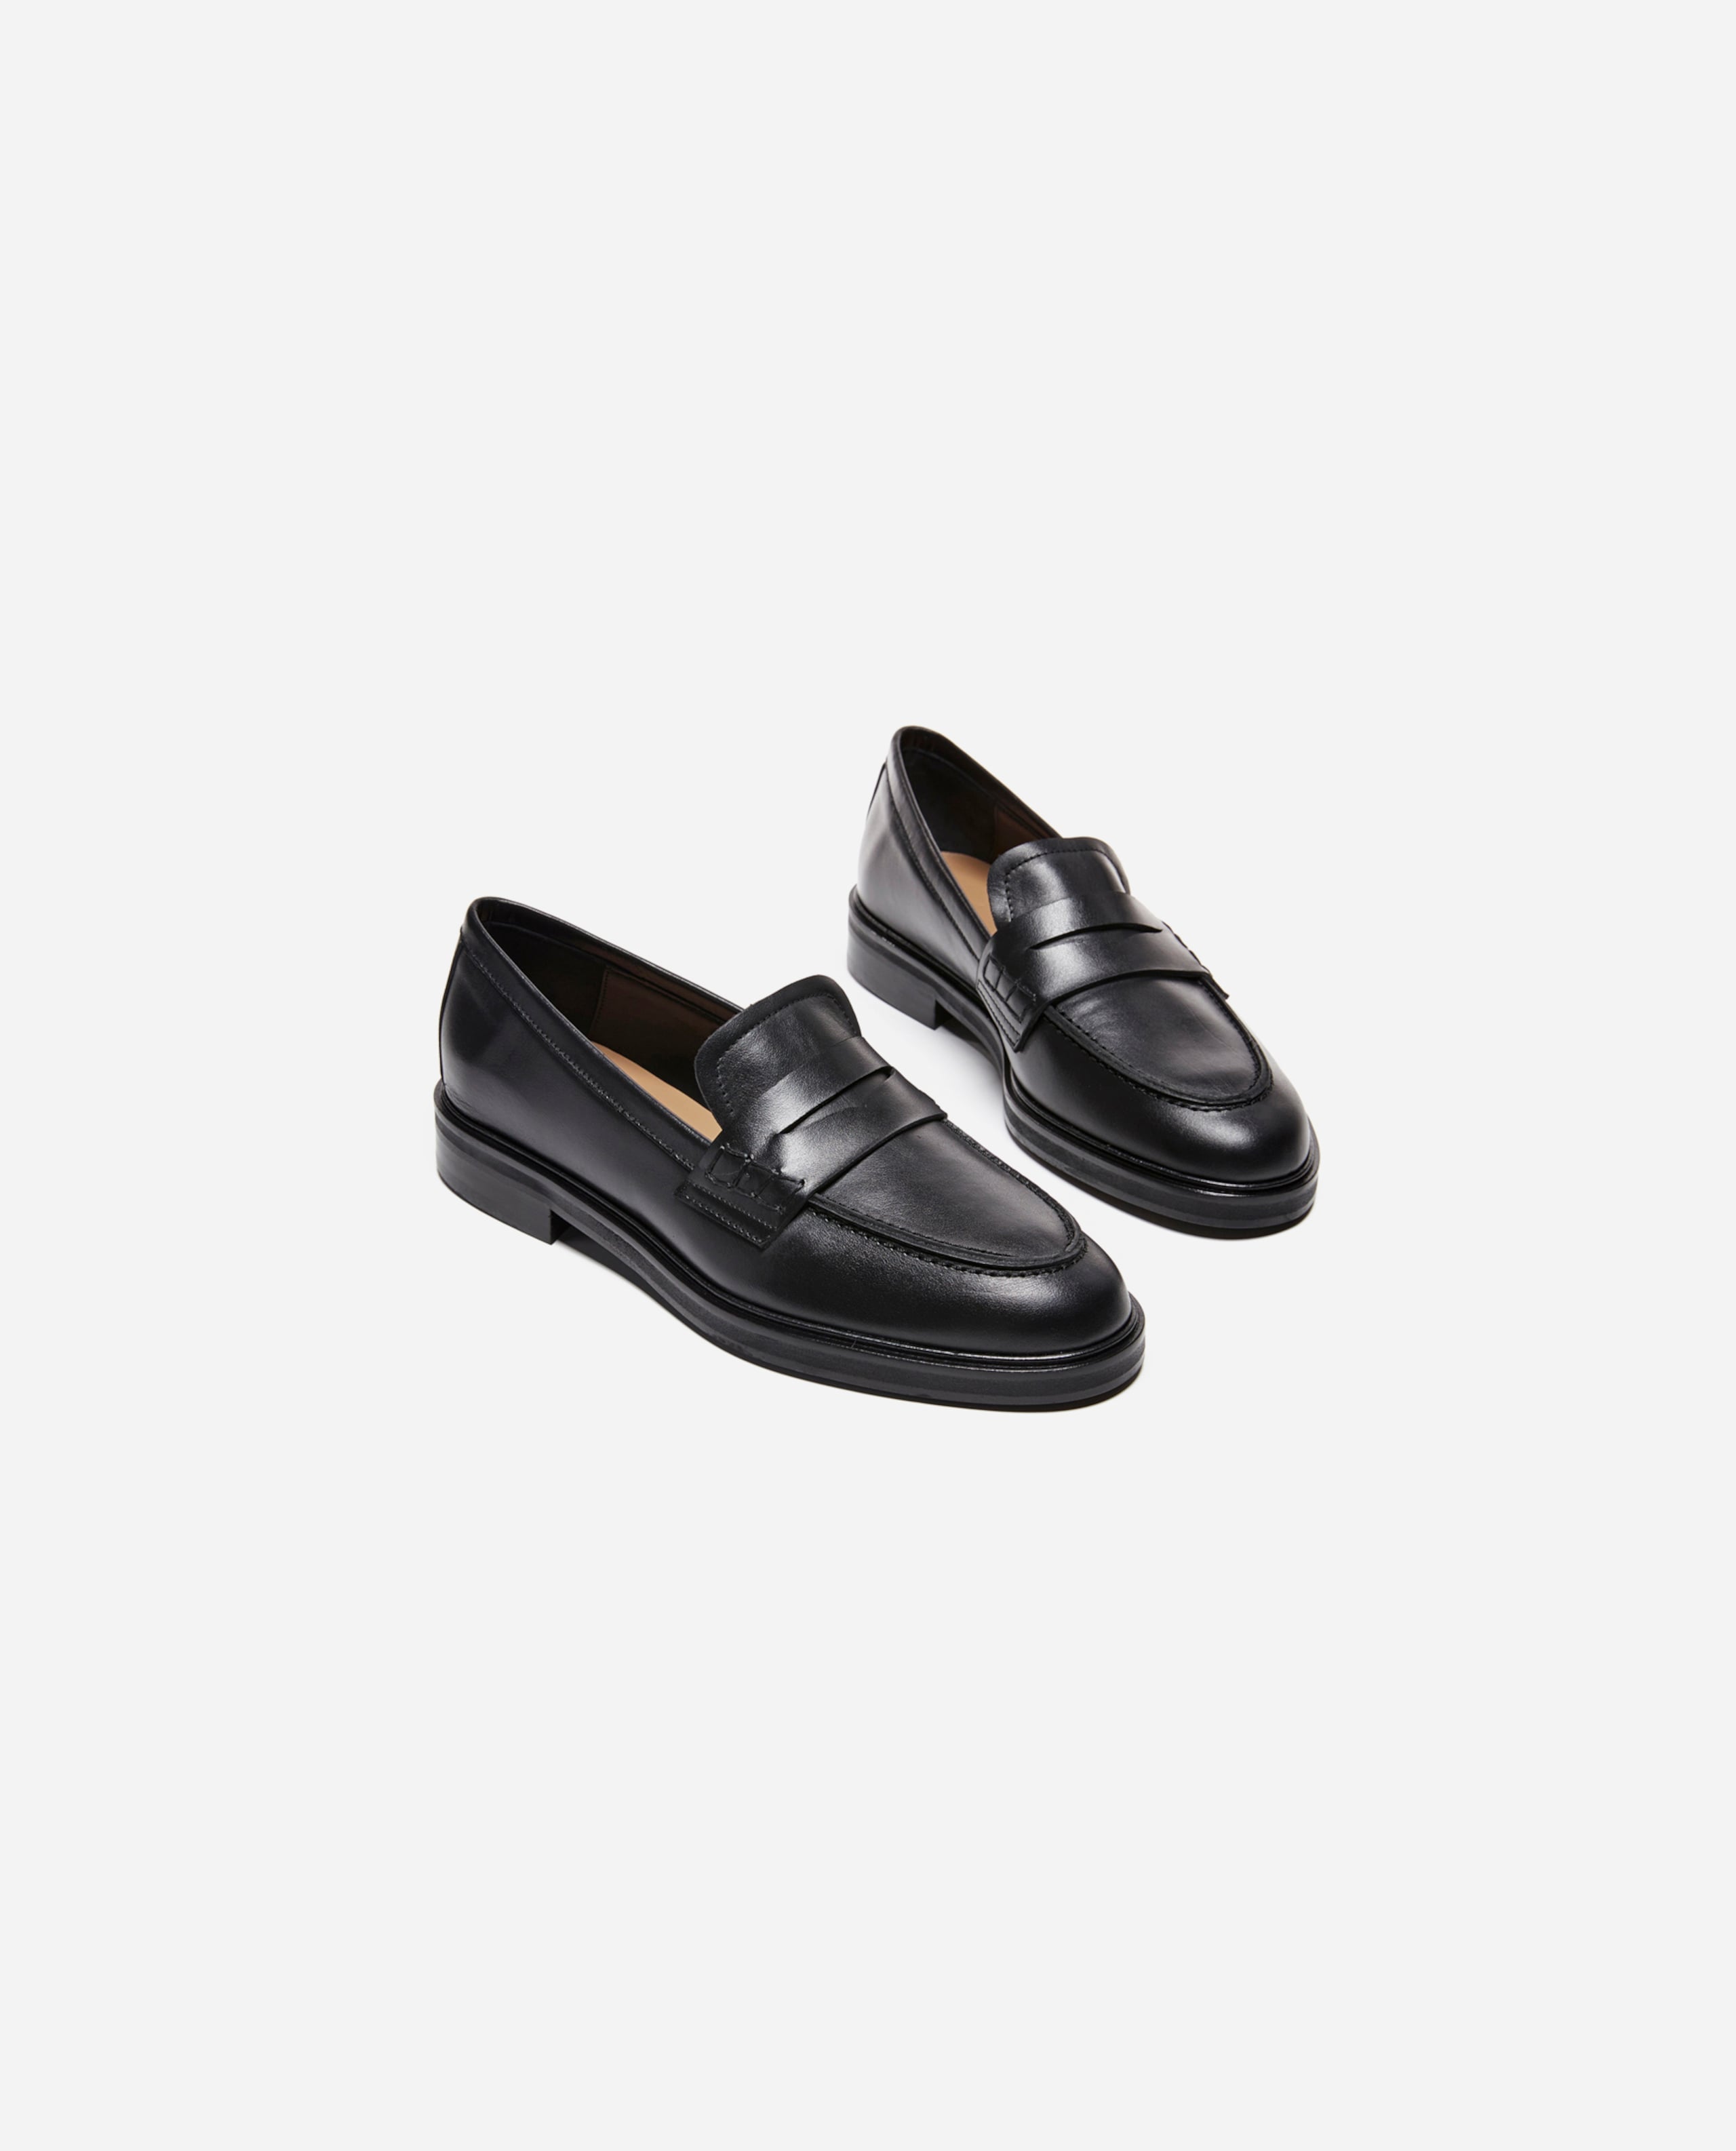 Sara Black Leather Loafers 21010115601-001 - 4